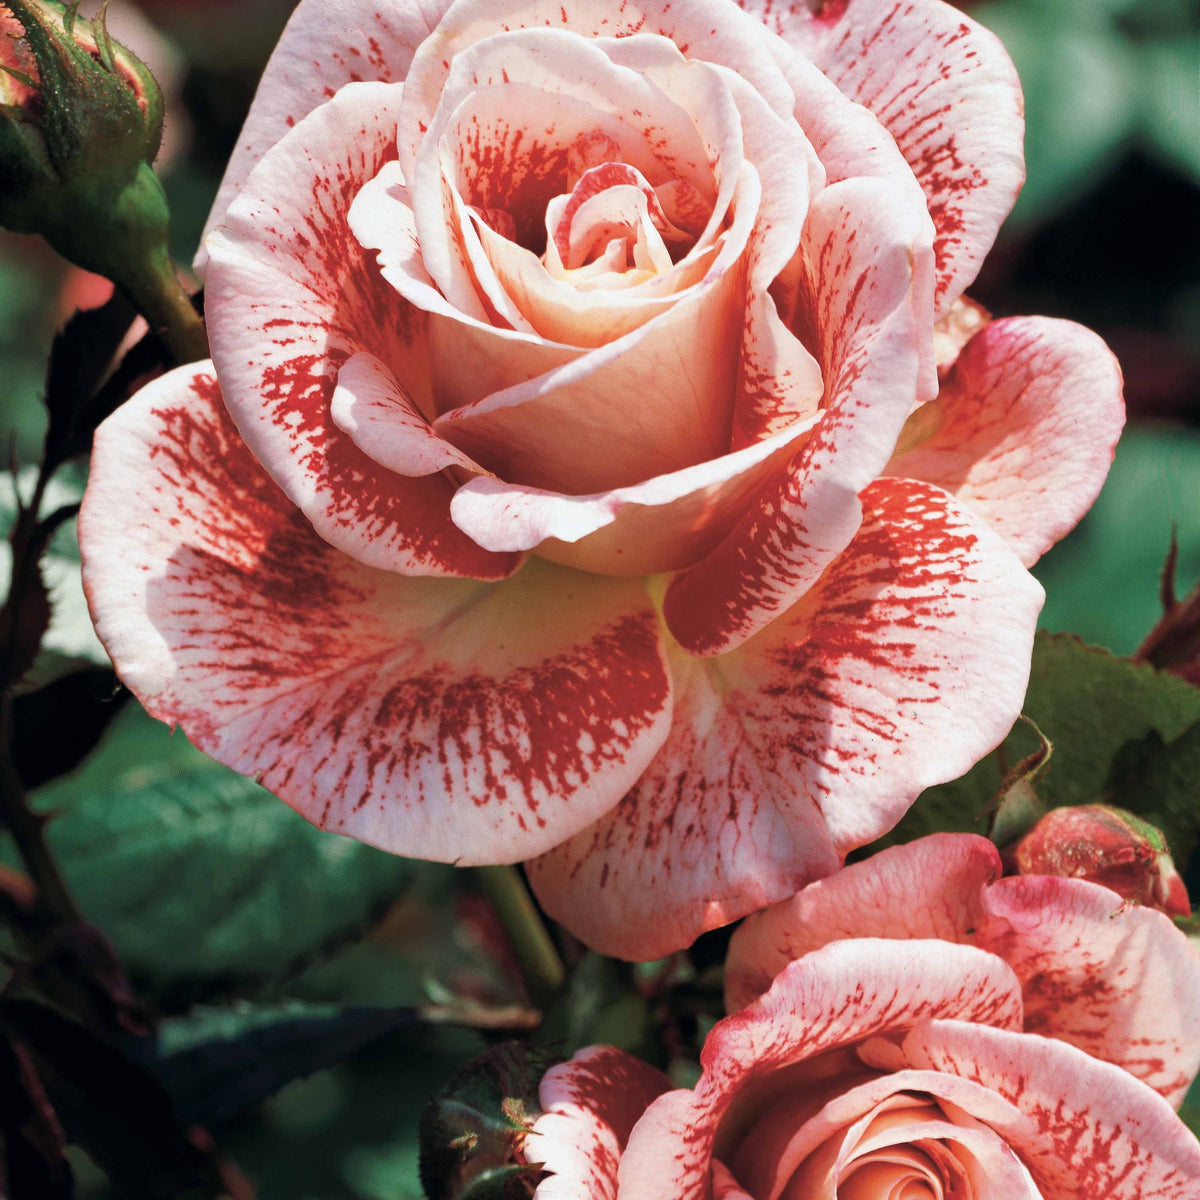 Collection de Rosiers buissons : Famosa, Whisky, Double Delight - Rosa 'famosa', 'whisky', 'double delight' - Rosiers